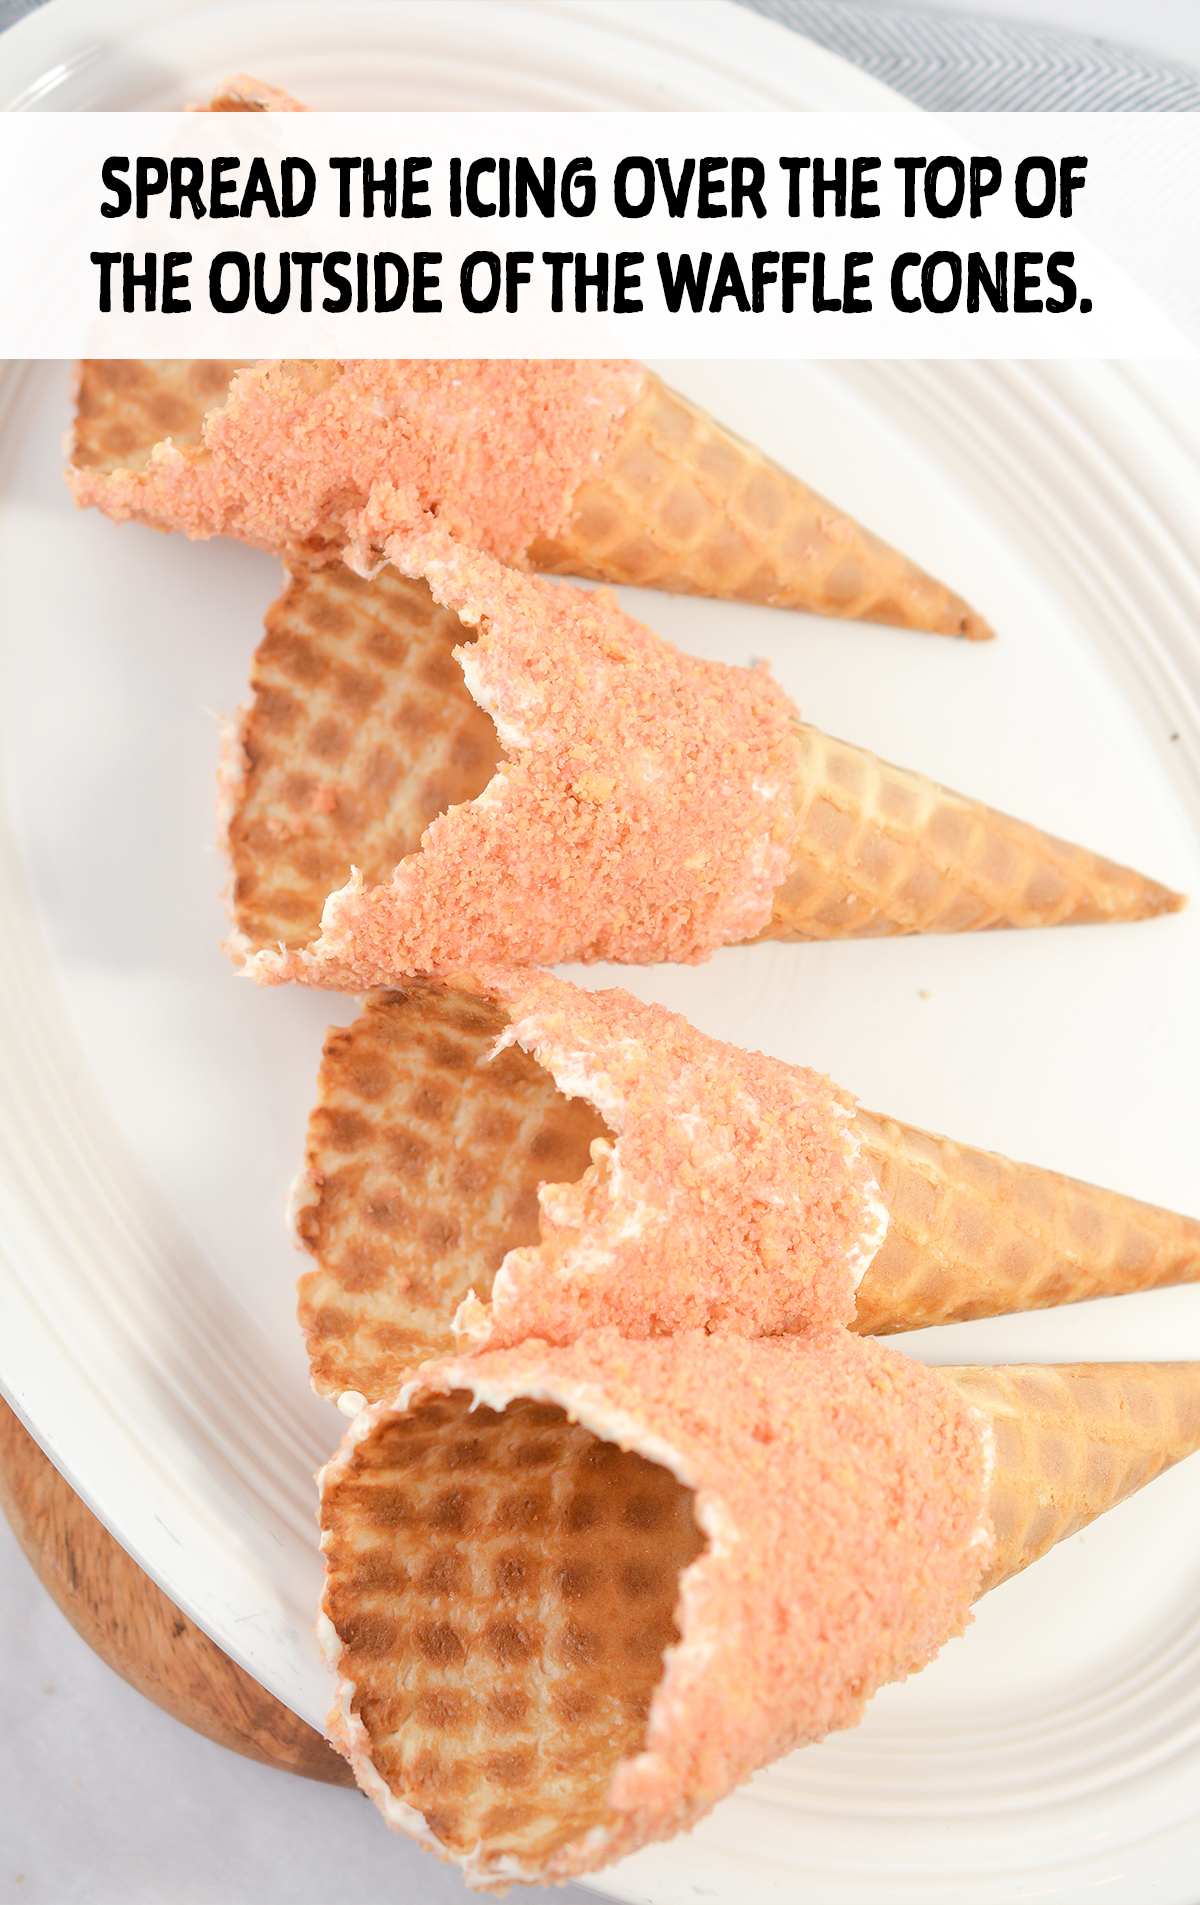 Spread the icing over the top of the outside of the waffle cones, going about halfway down the cone